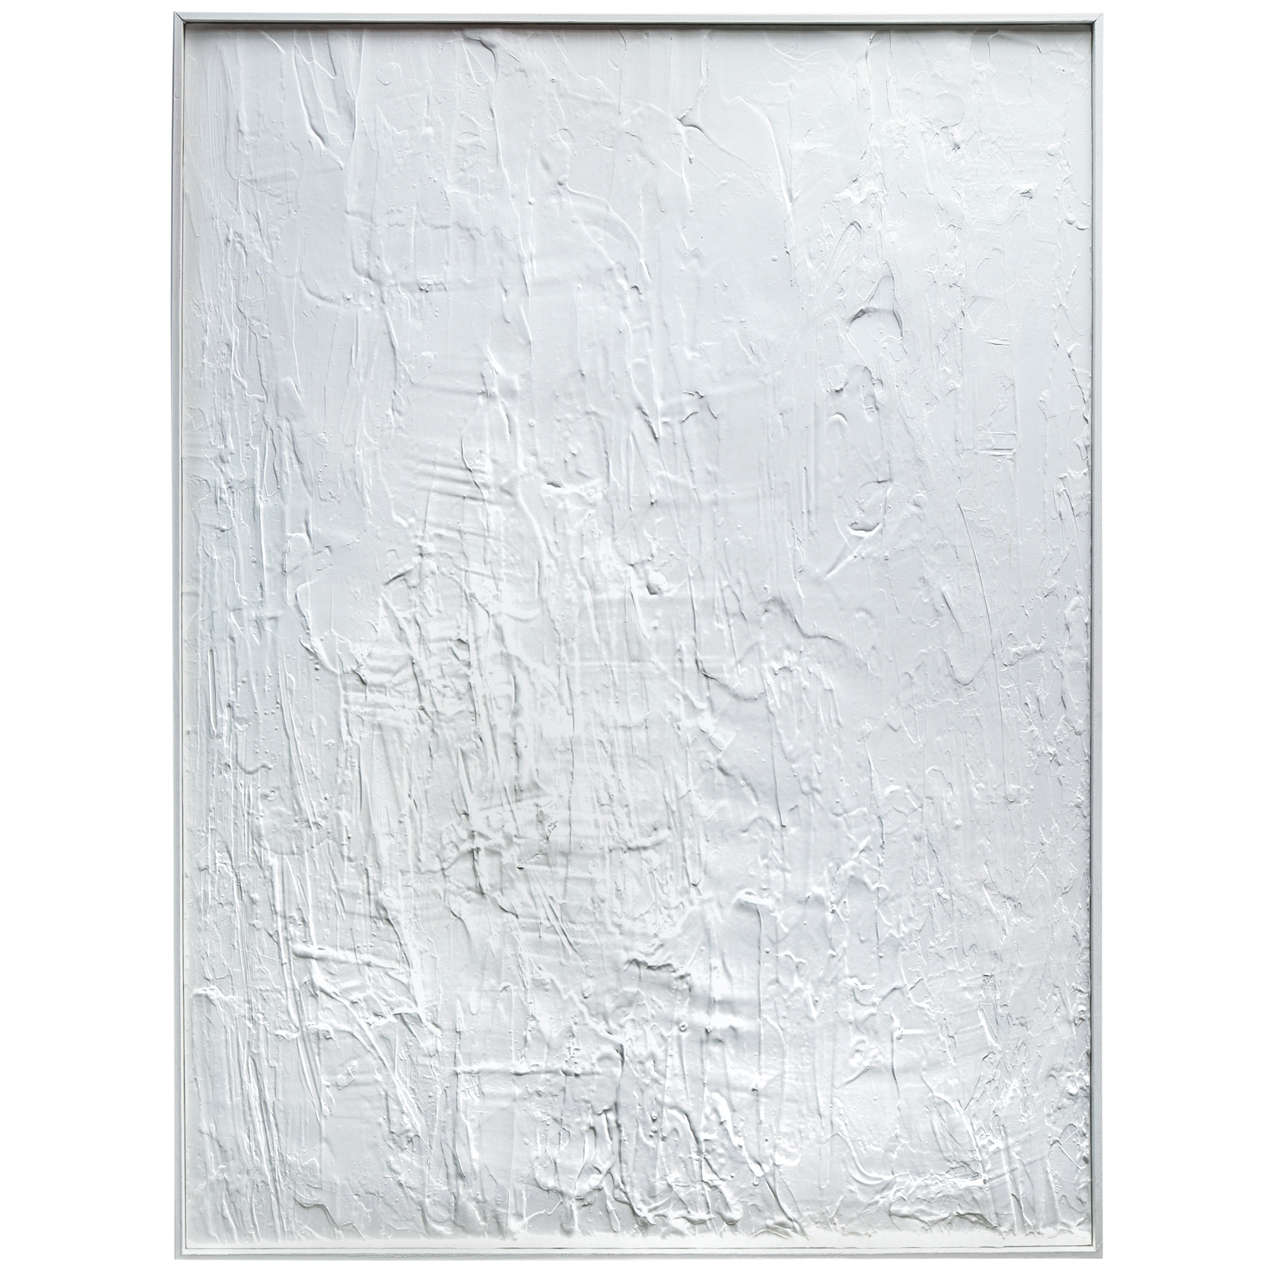 "Bloom"   white plaster relief with oil paint on birchwood panel  30x40